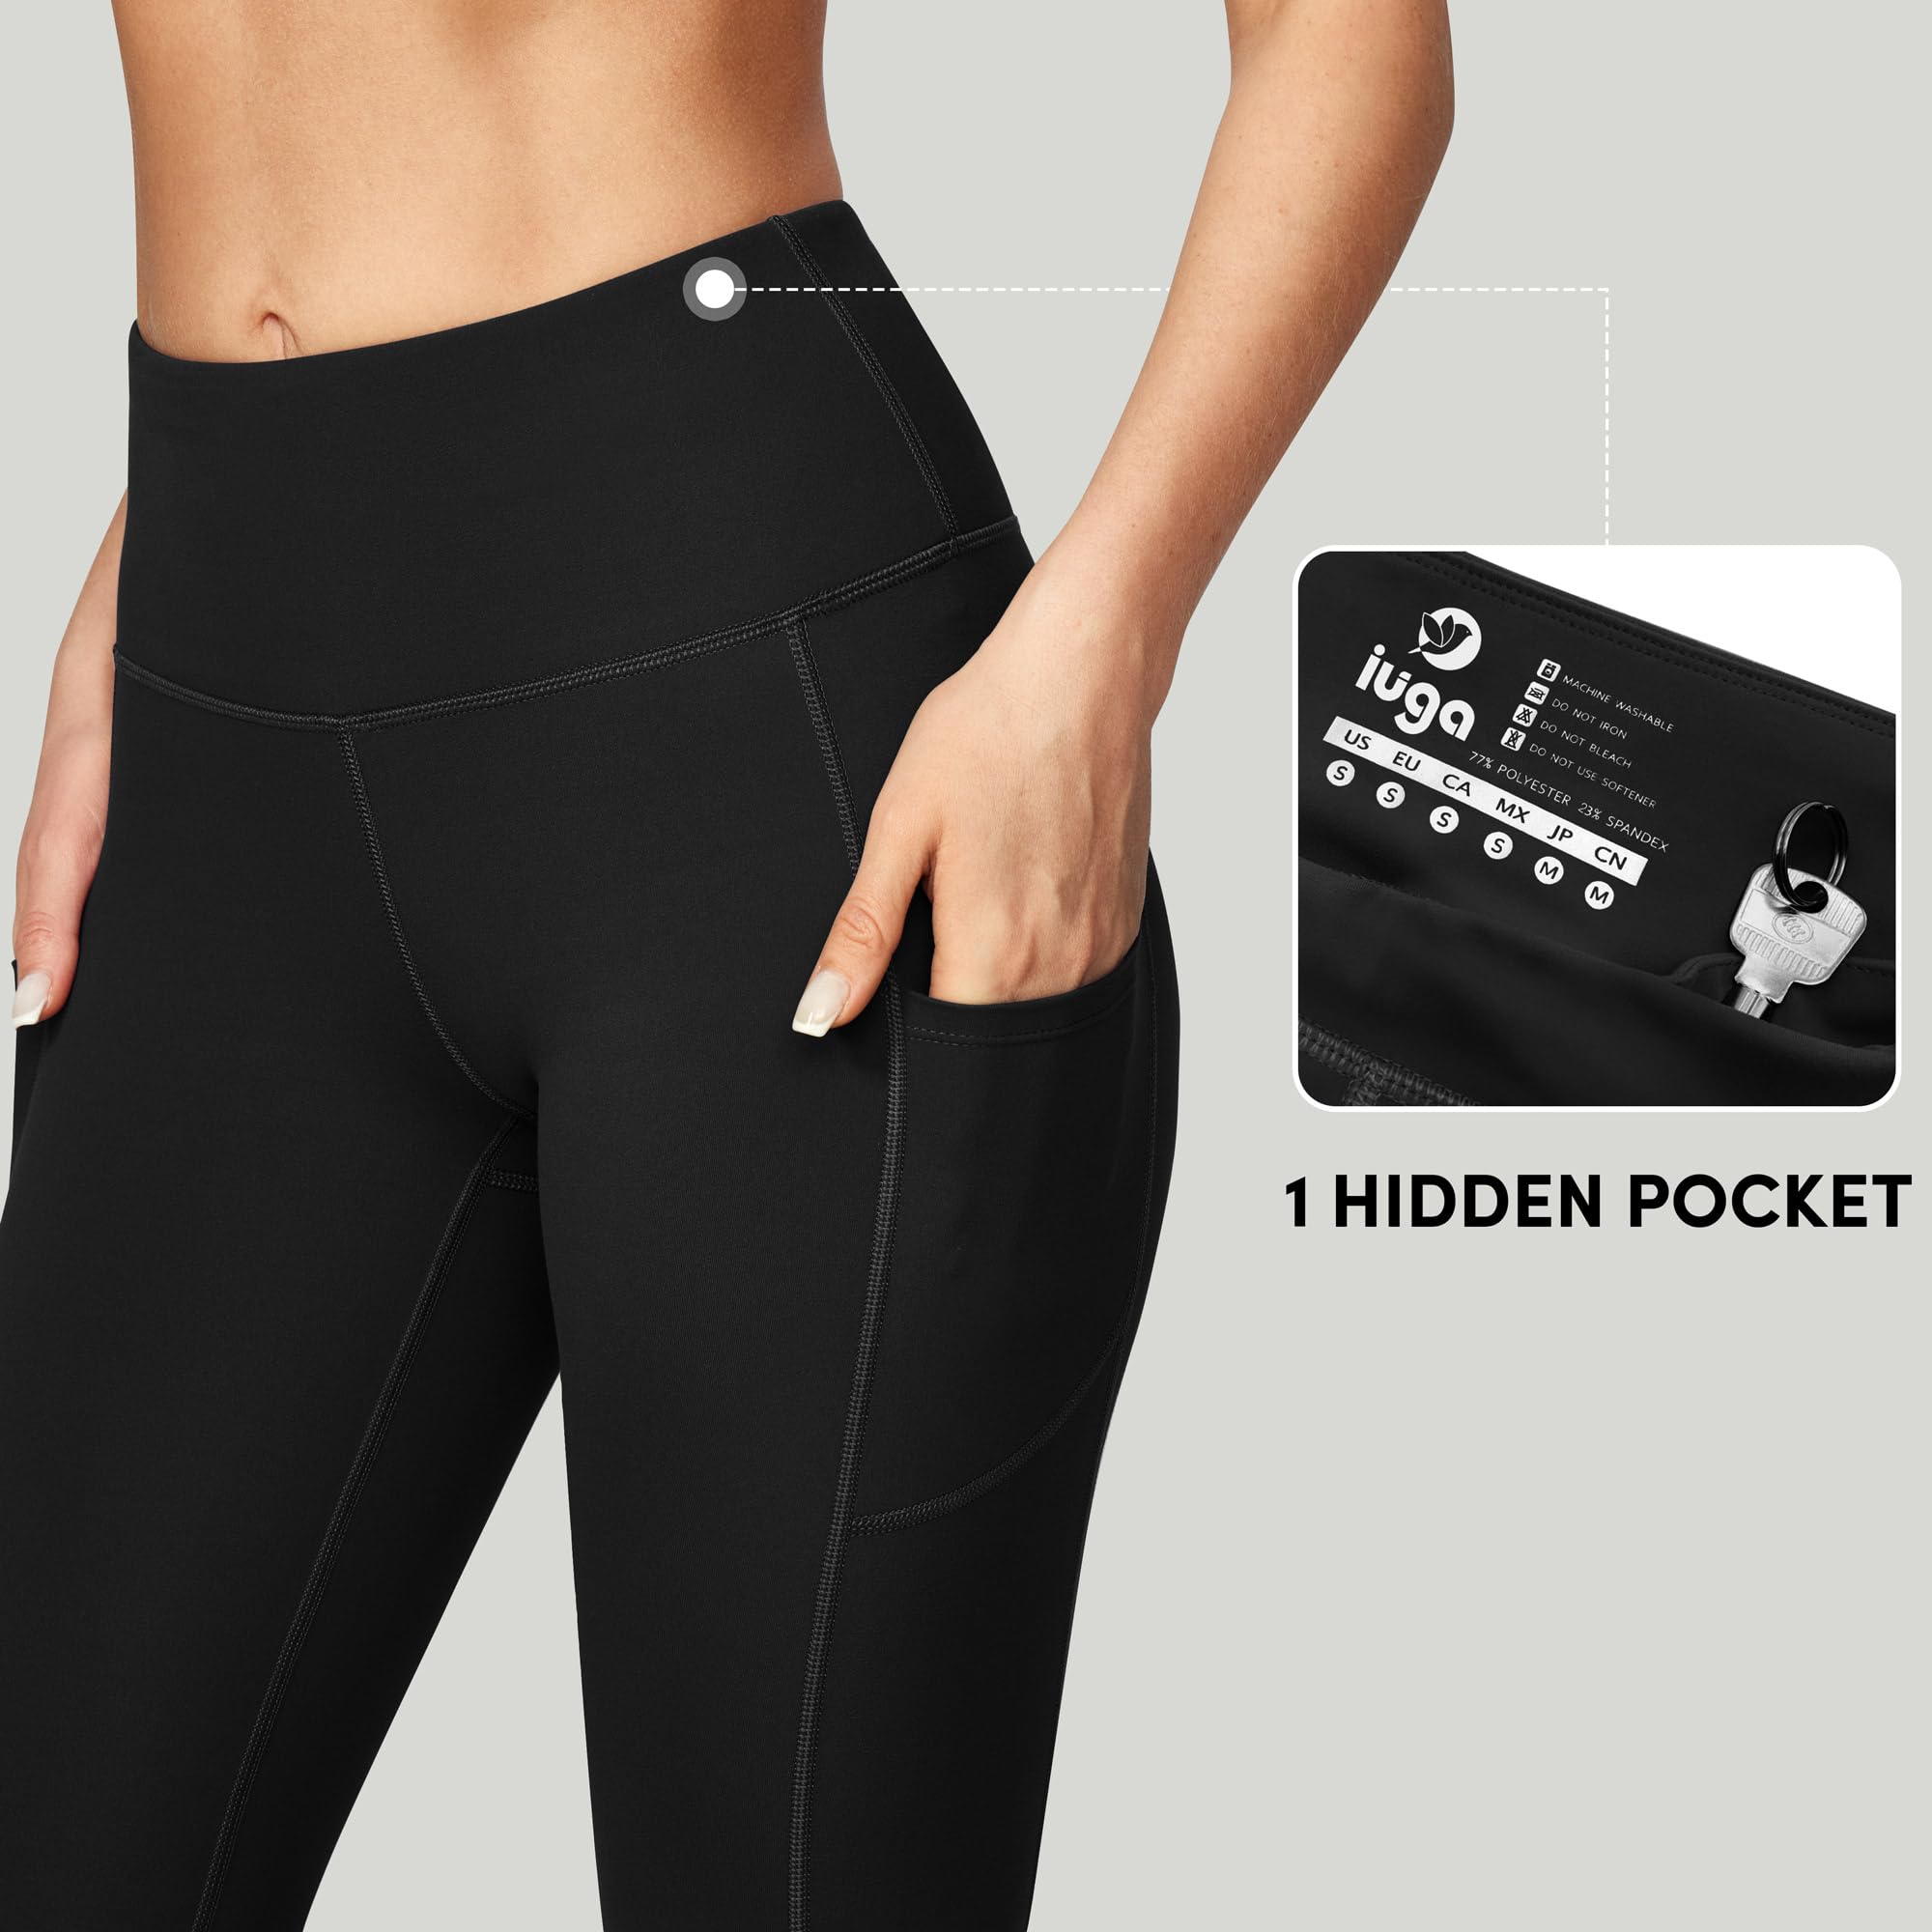 IUGA High Waist Yoga Pants with Pockets, Leggings for Women Tummy Control, Workout Leggings for Women 4 Way Stretch